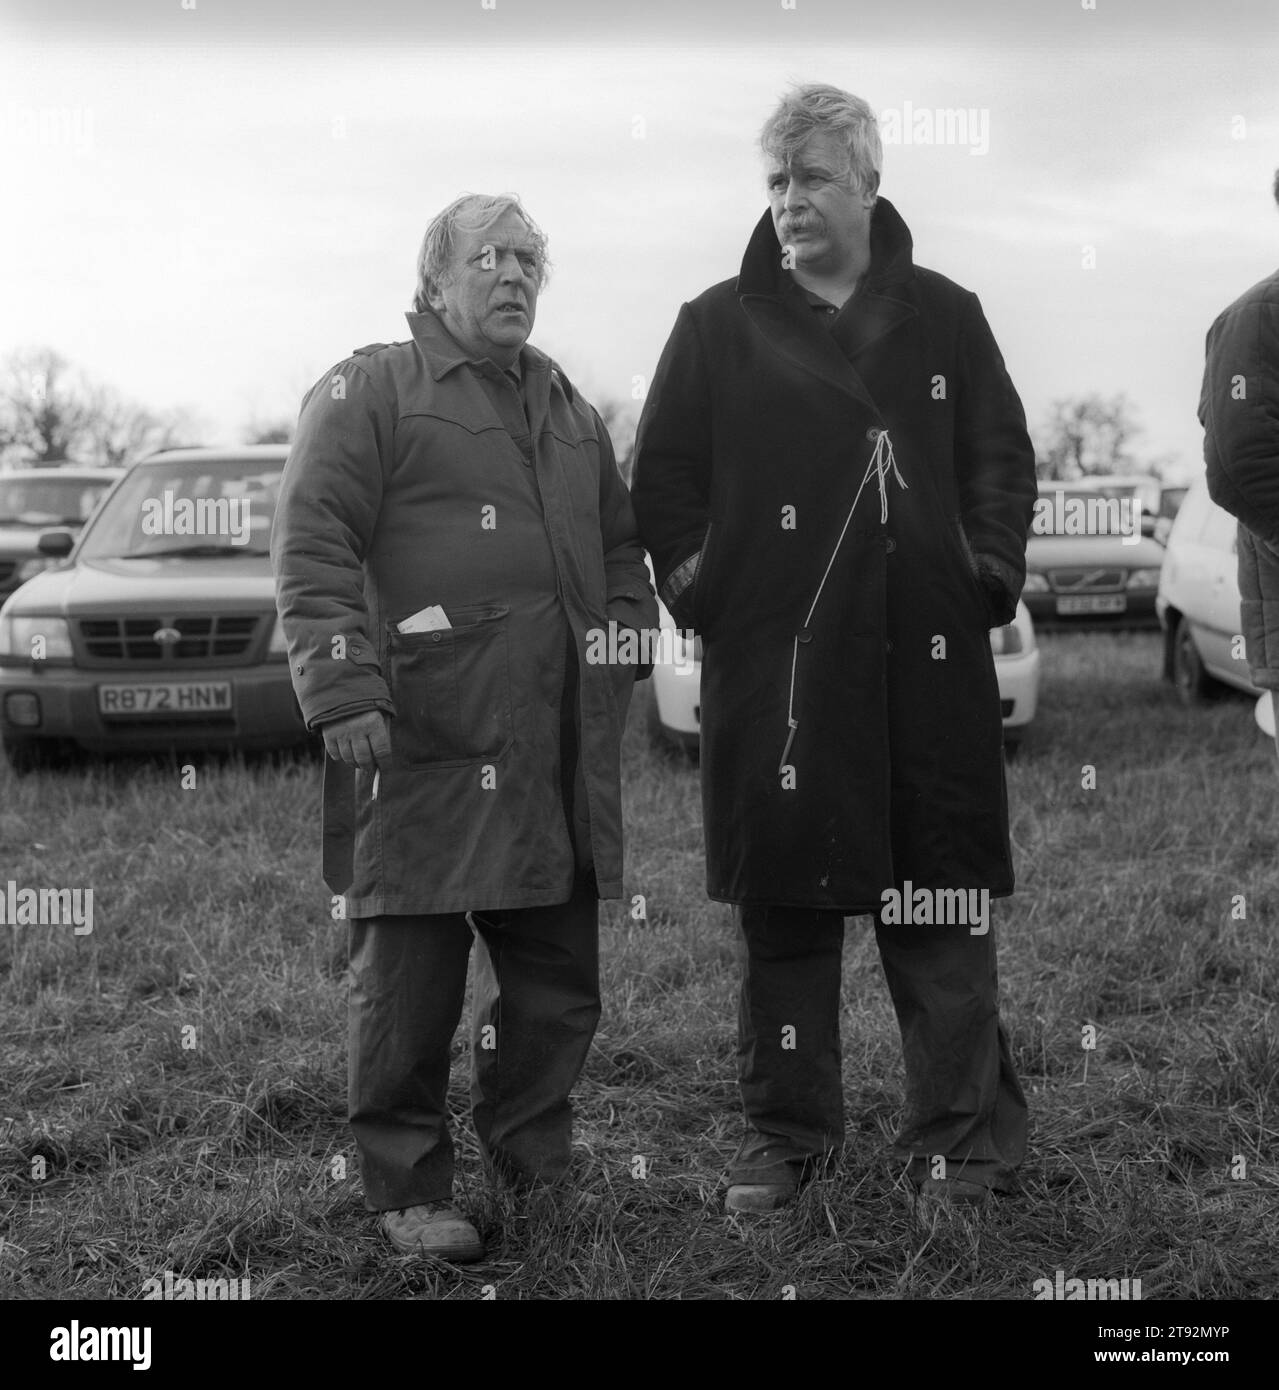 Hare Coursing. Greyhound 2000 Meet. Near Six Mile Bottom, Newmarket, Suffolk. Two working class men, the pencil on a piece of string tied to a button of his coat is so he does loose it. Pencil is used to mark his race card. 2000s England HOMER SYKES Stock Photo